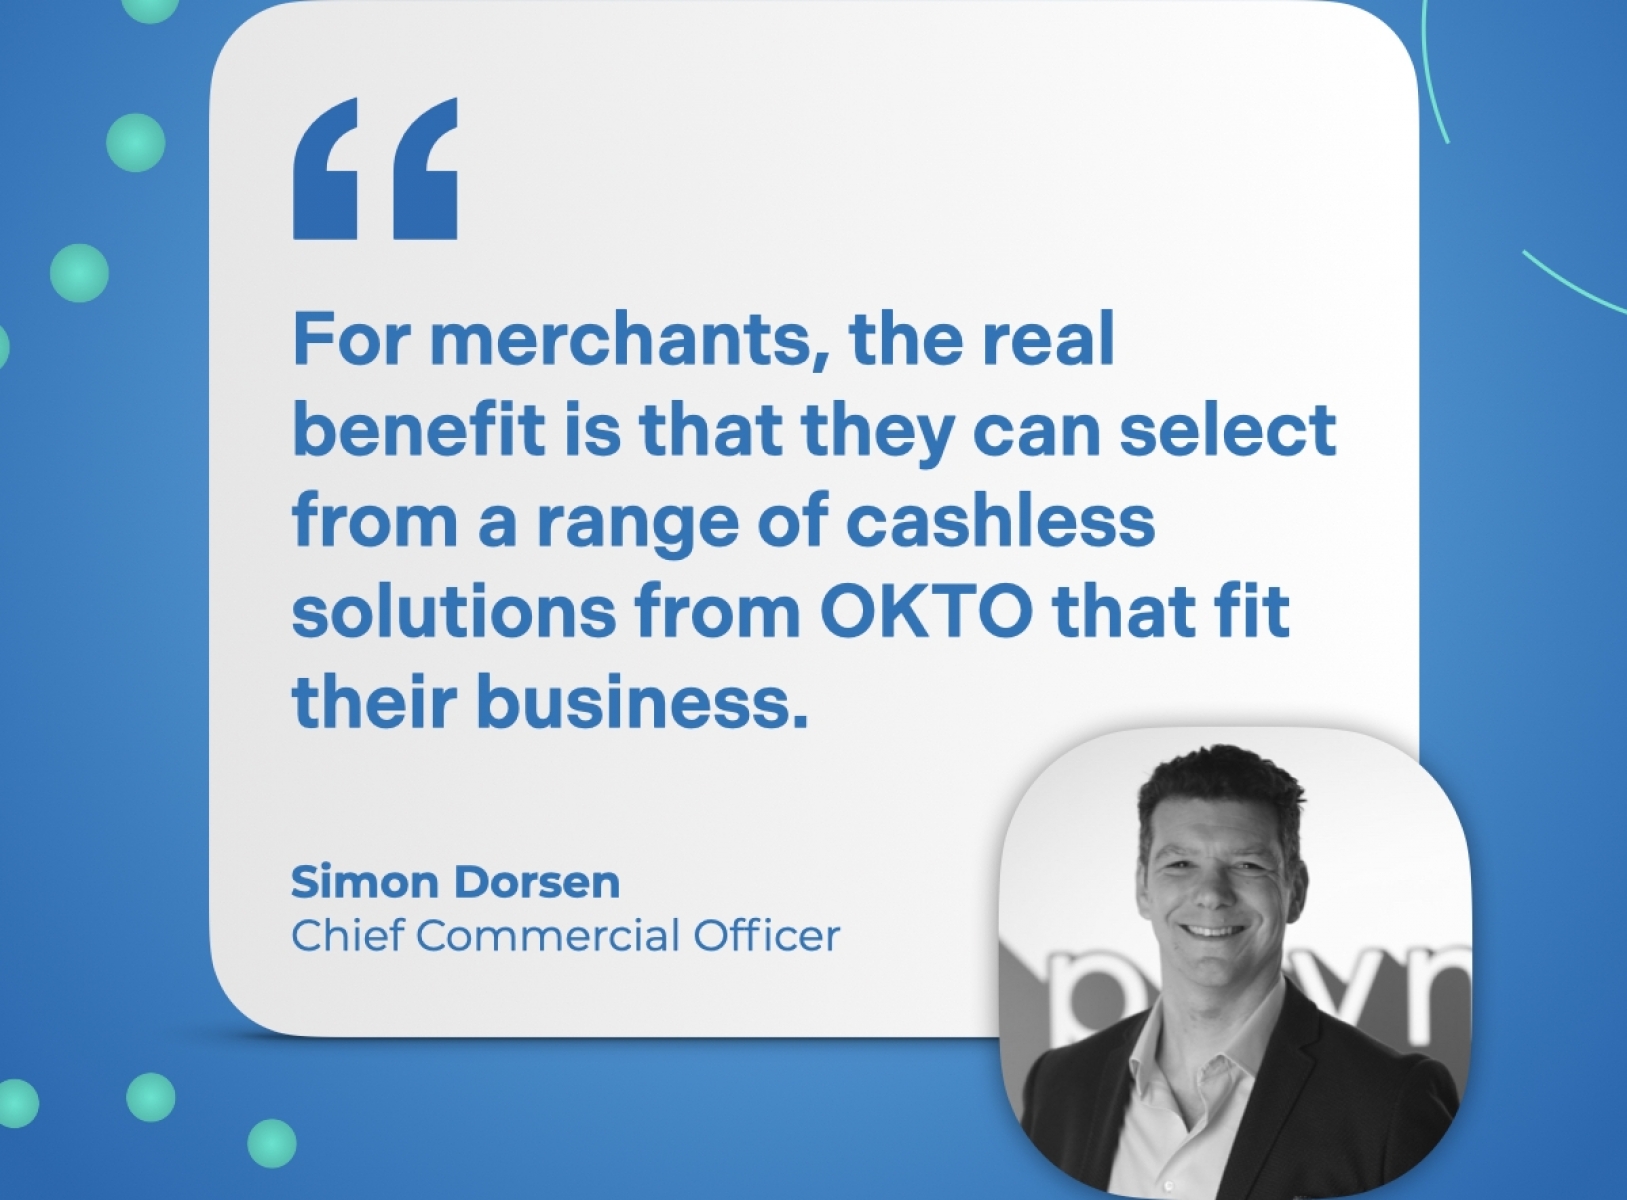 Everything You Need To Know For OKTO&#8217;s Cashless Payment Solutions